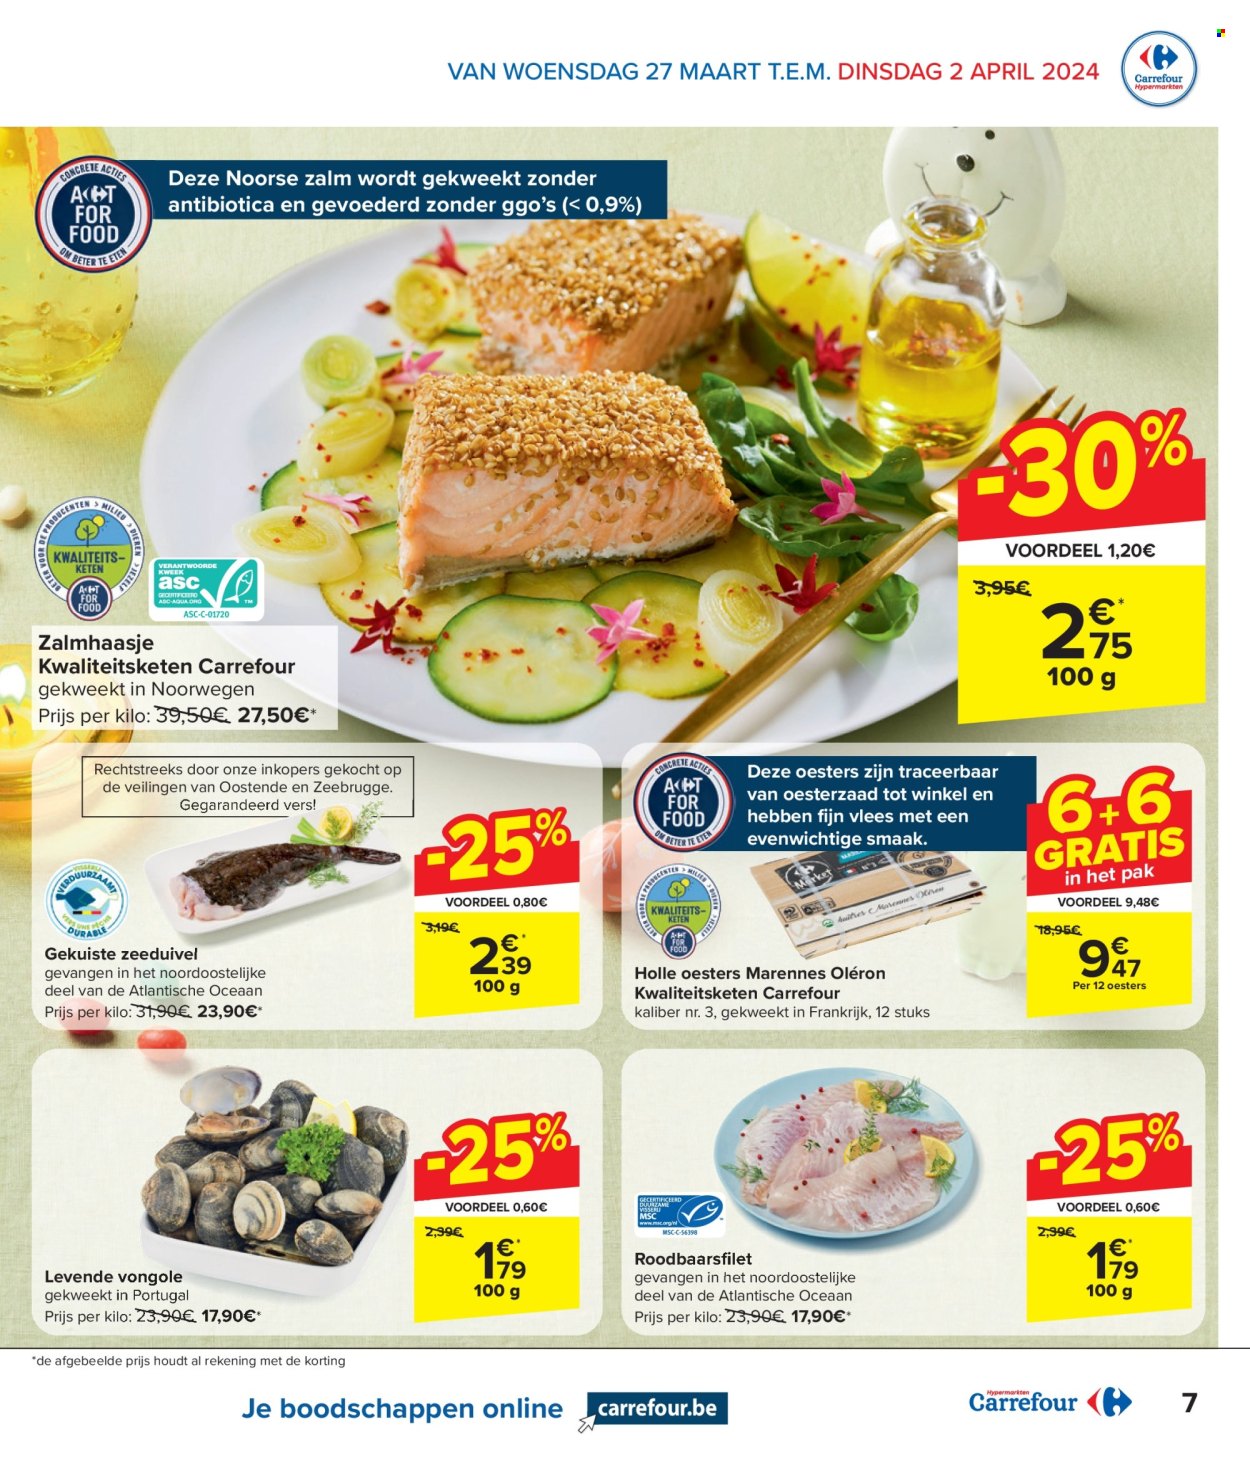 Catalogue Carrefour hypermarkt - 27.3.2024 - 8.4.2024. Page 7.